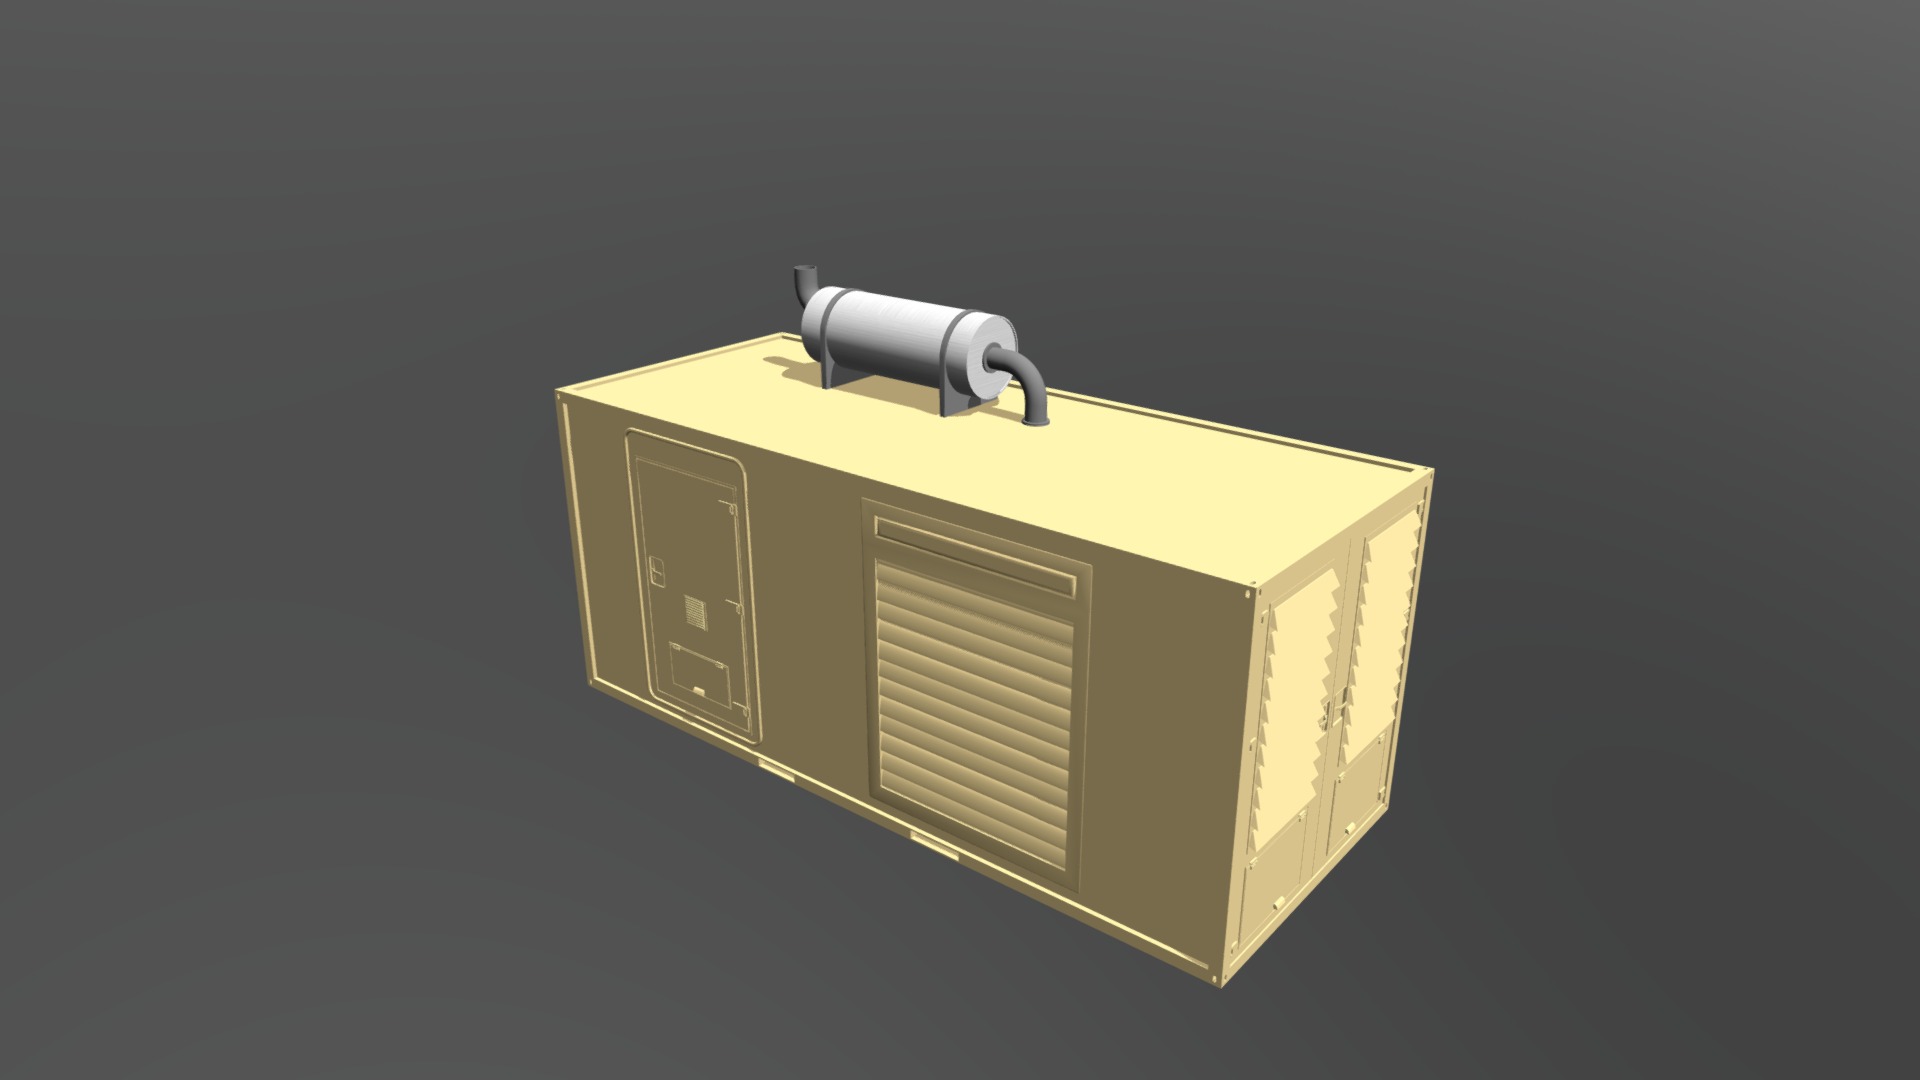 3D model 20ft Generator Container Version 1 - This is a 3D model of the 20ft Generator Container Version 1. The 3D model is about engineering drawing.